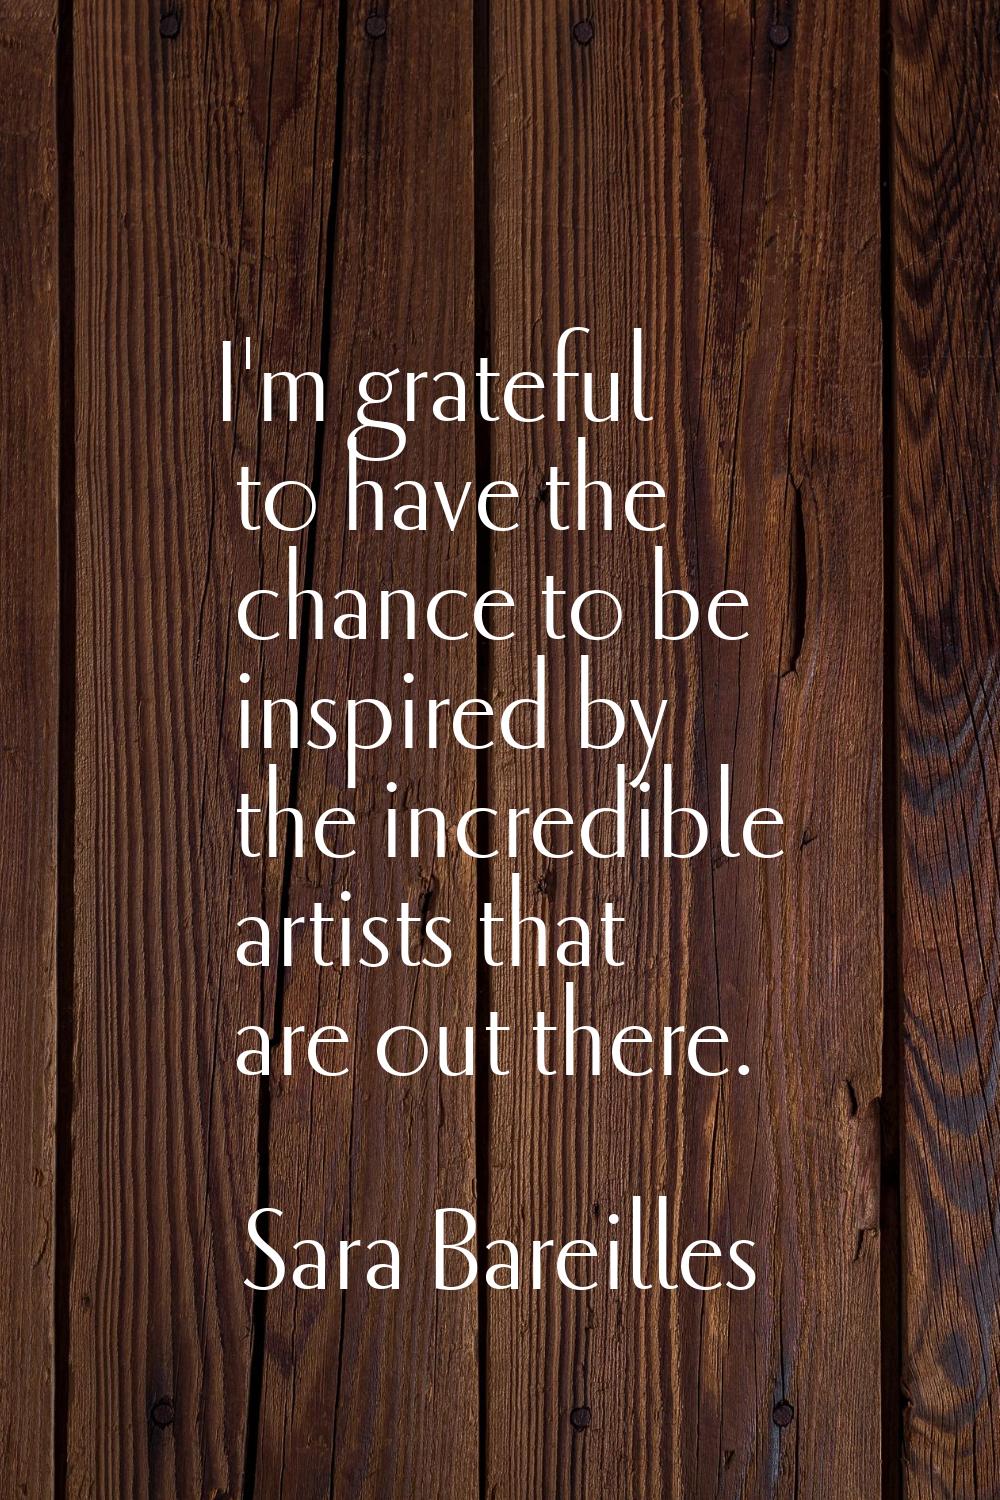 I'm grateful to have the chance to be inspired by the incredible artists that are out there.